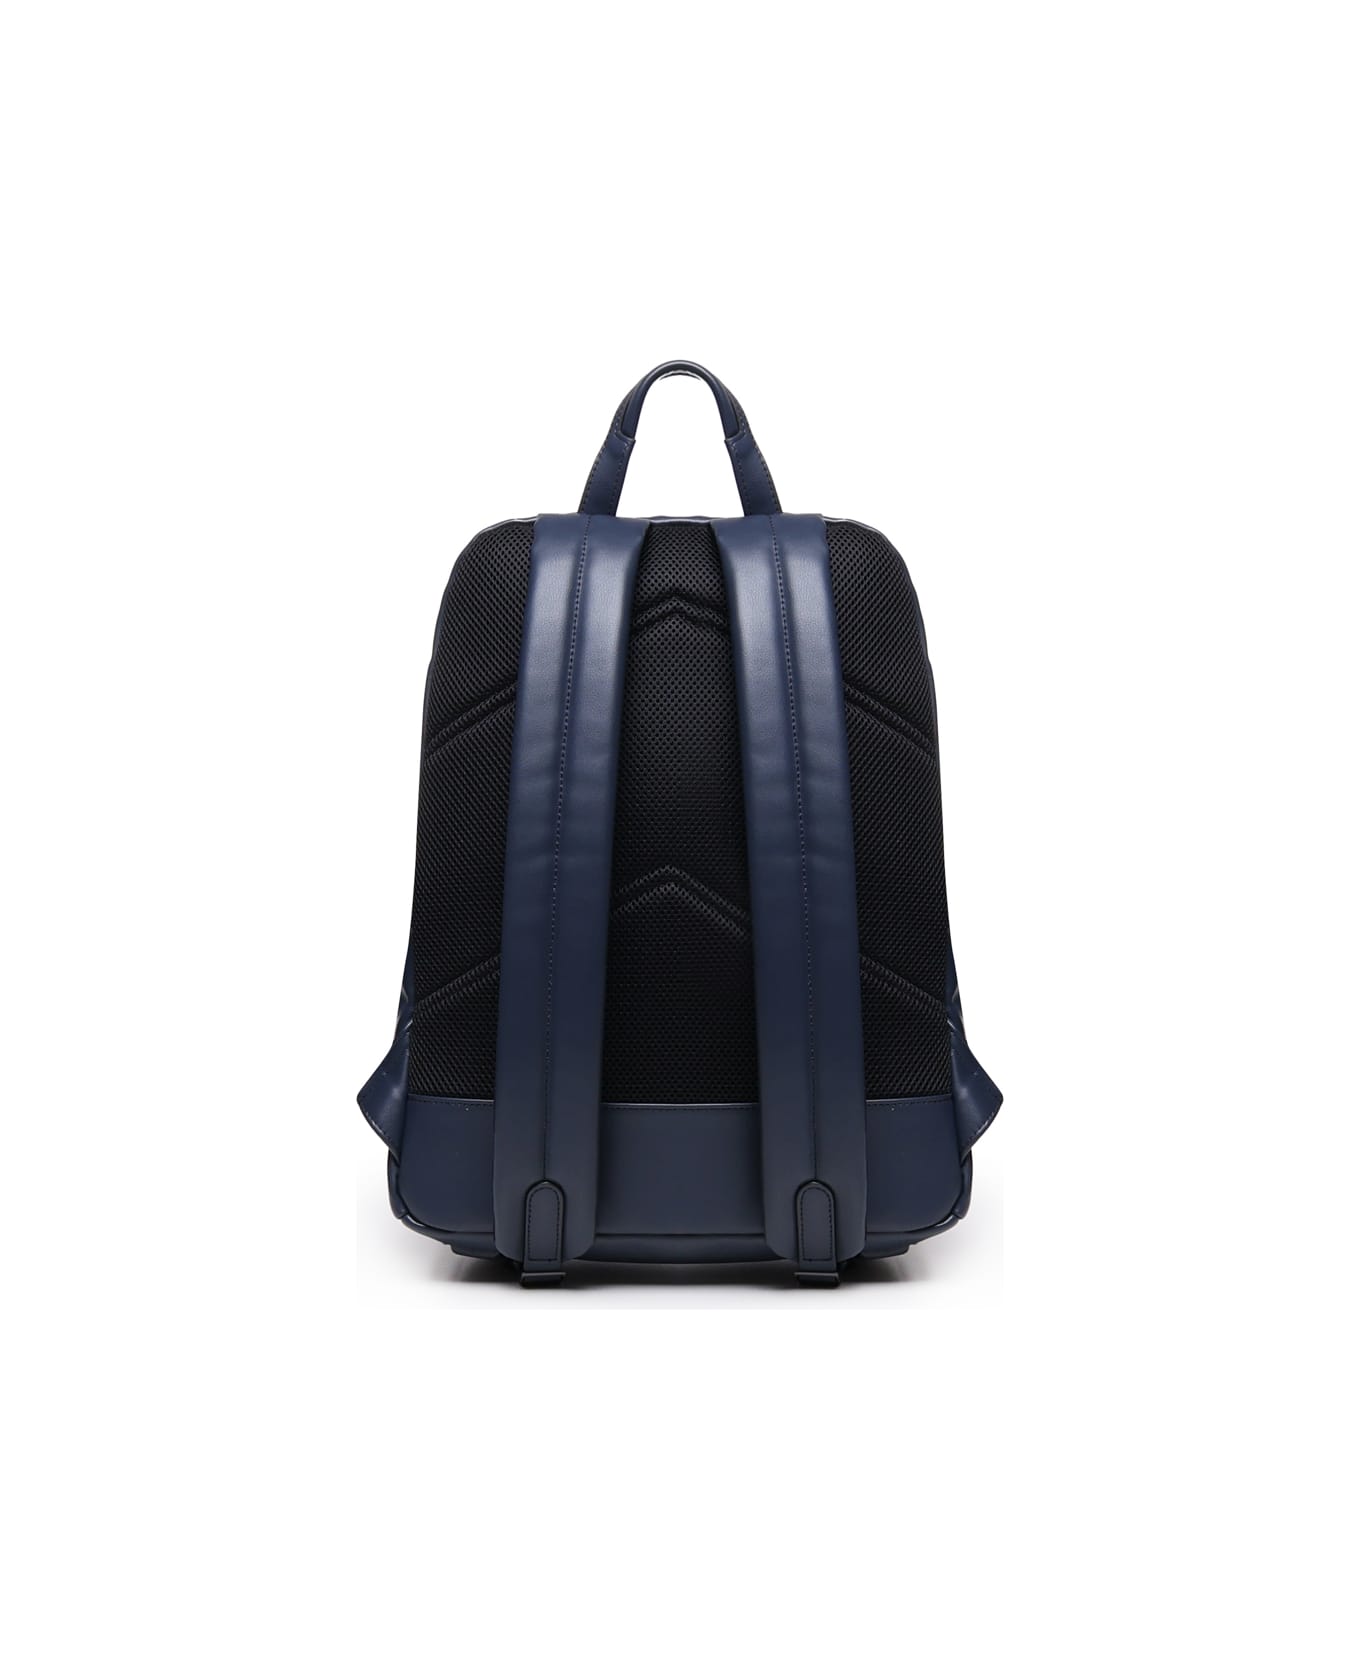 Calvin Klein Faux Leather Backpack - Blu navy